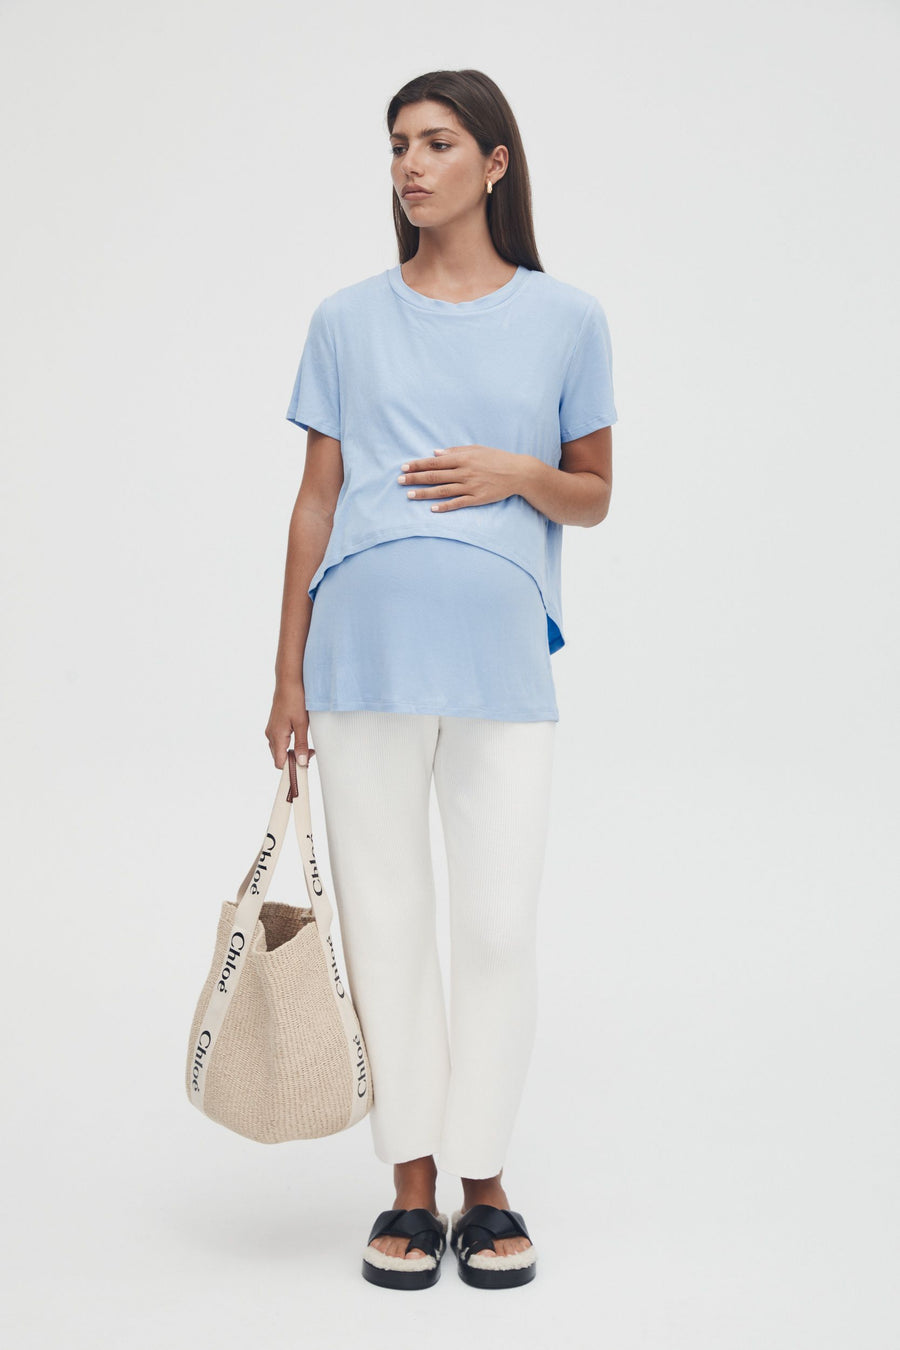 Stretchy Maternity Tee (Pale Blue) 5